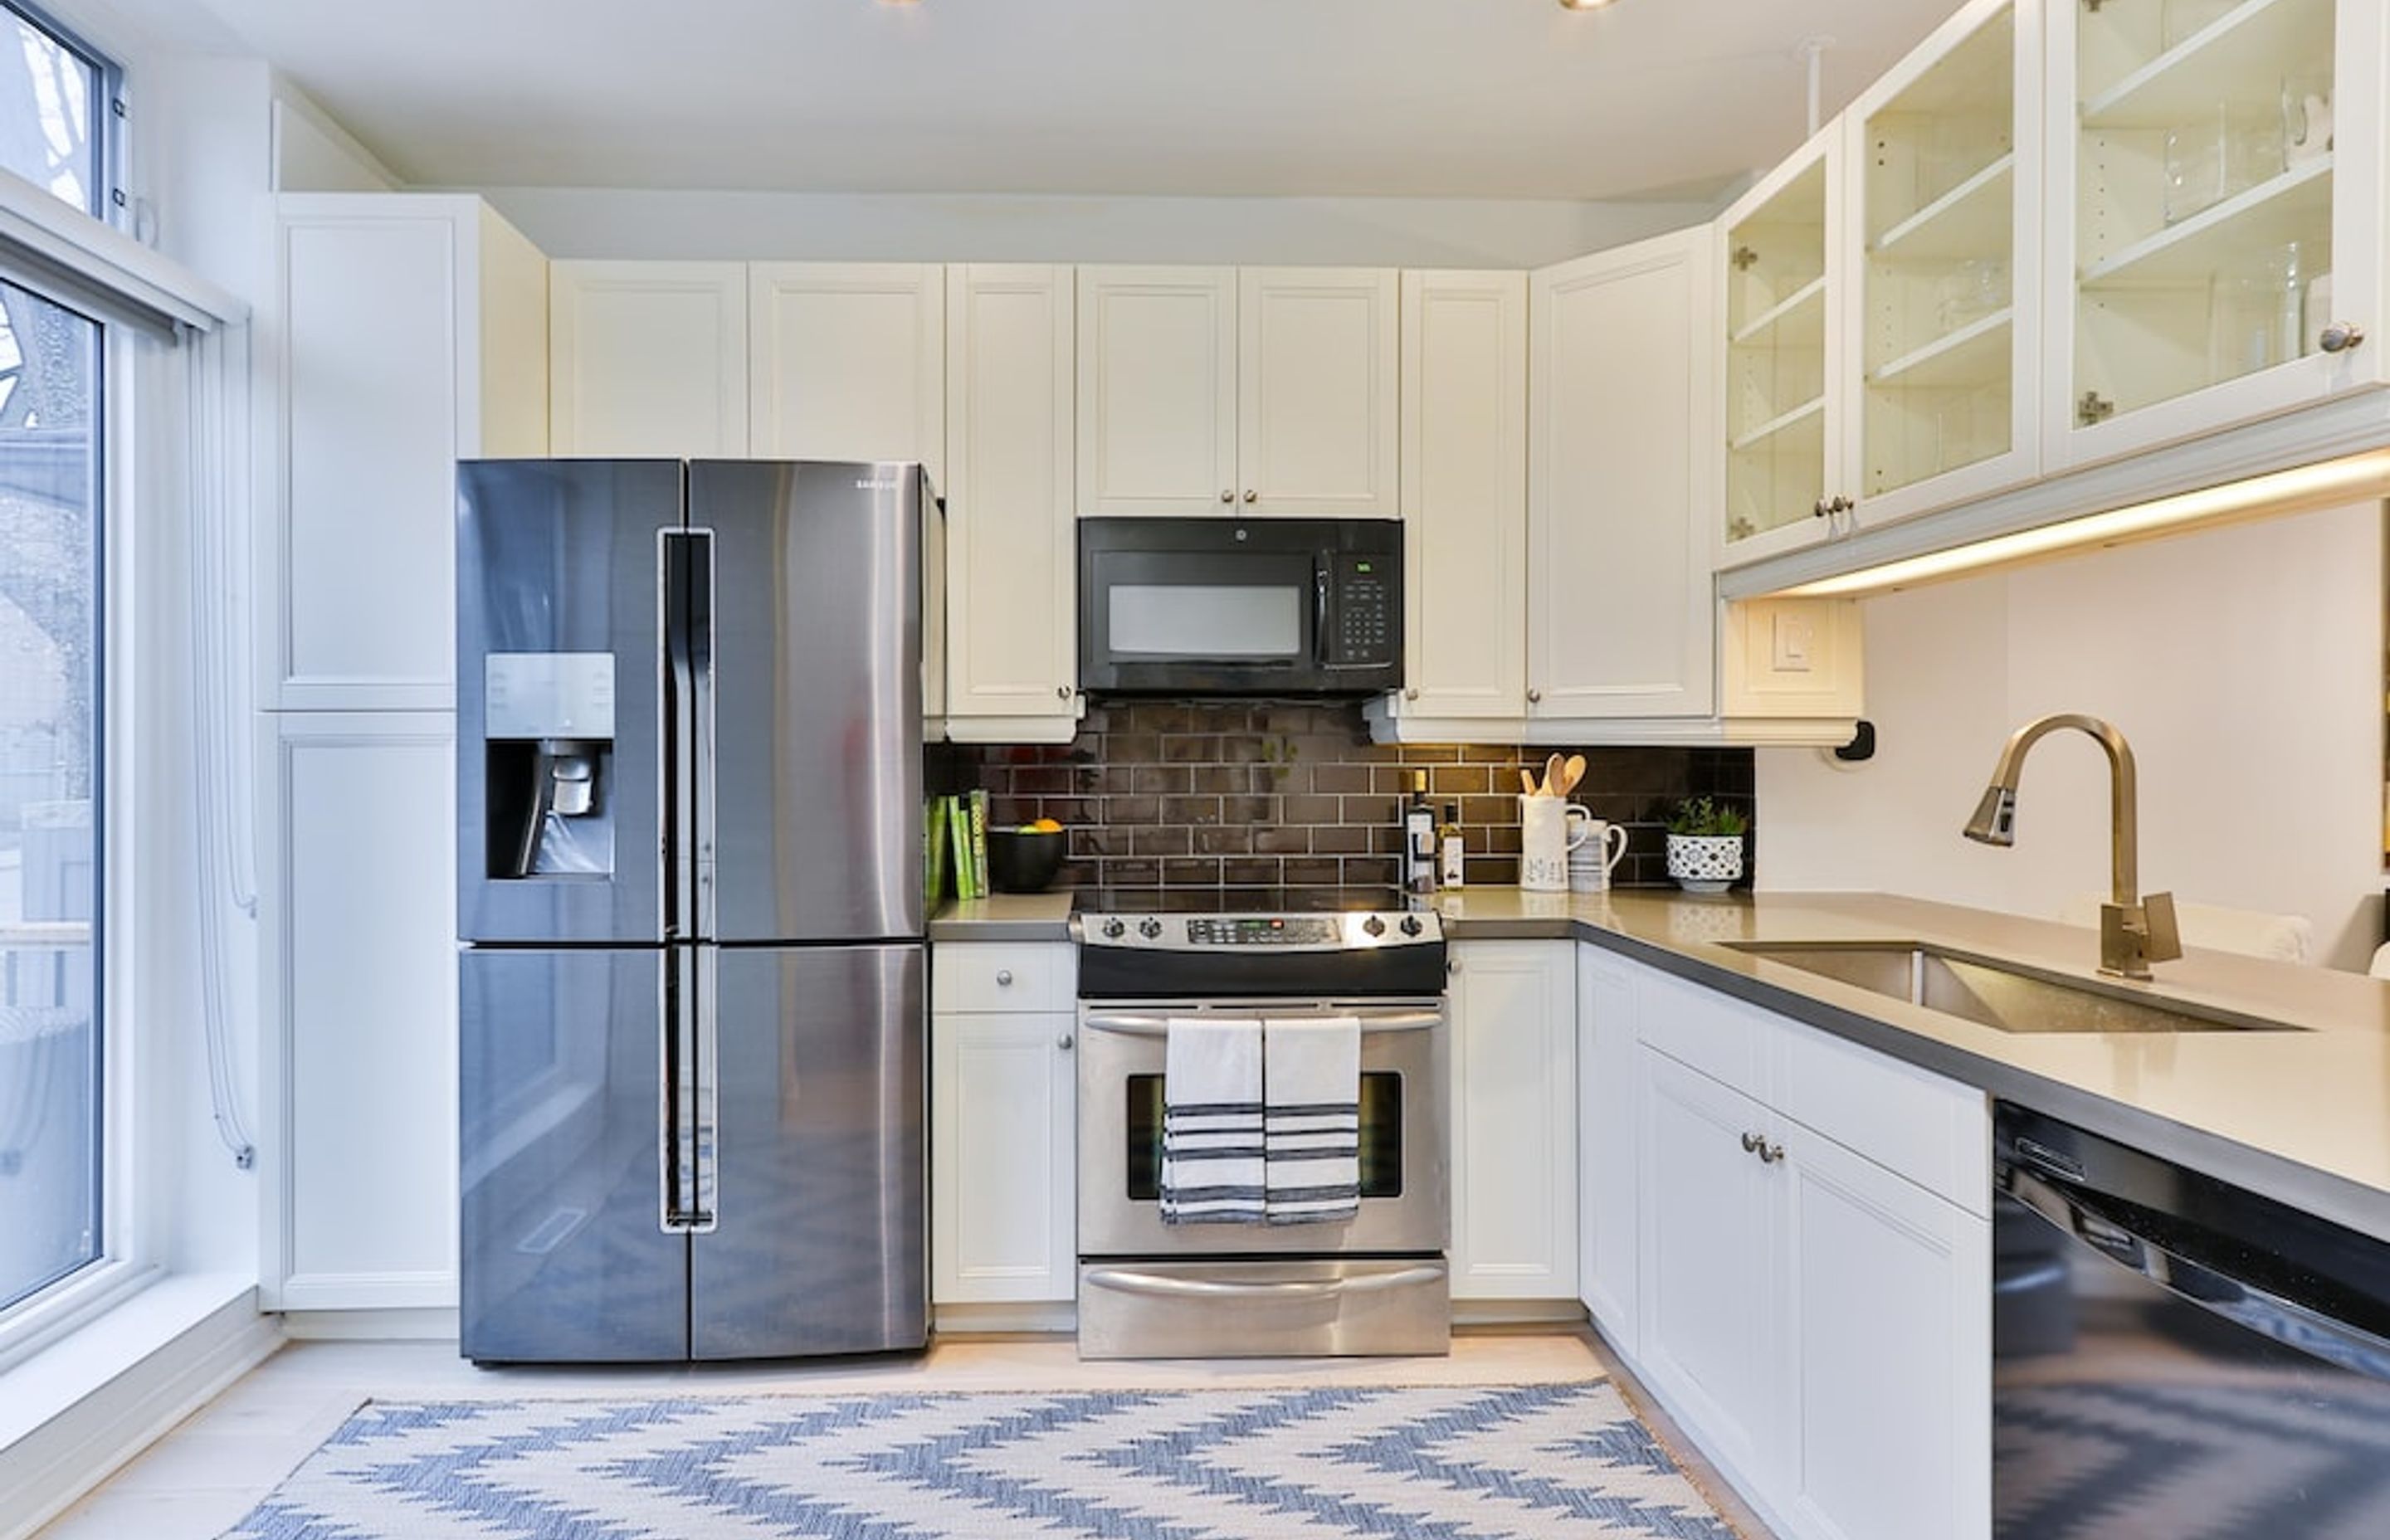 Stainless Steel Appliances in Kitchen | Photo Credit - iStock